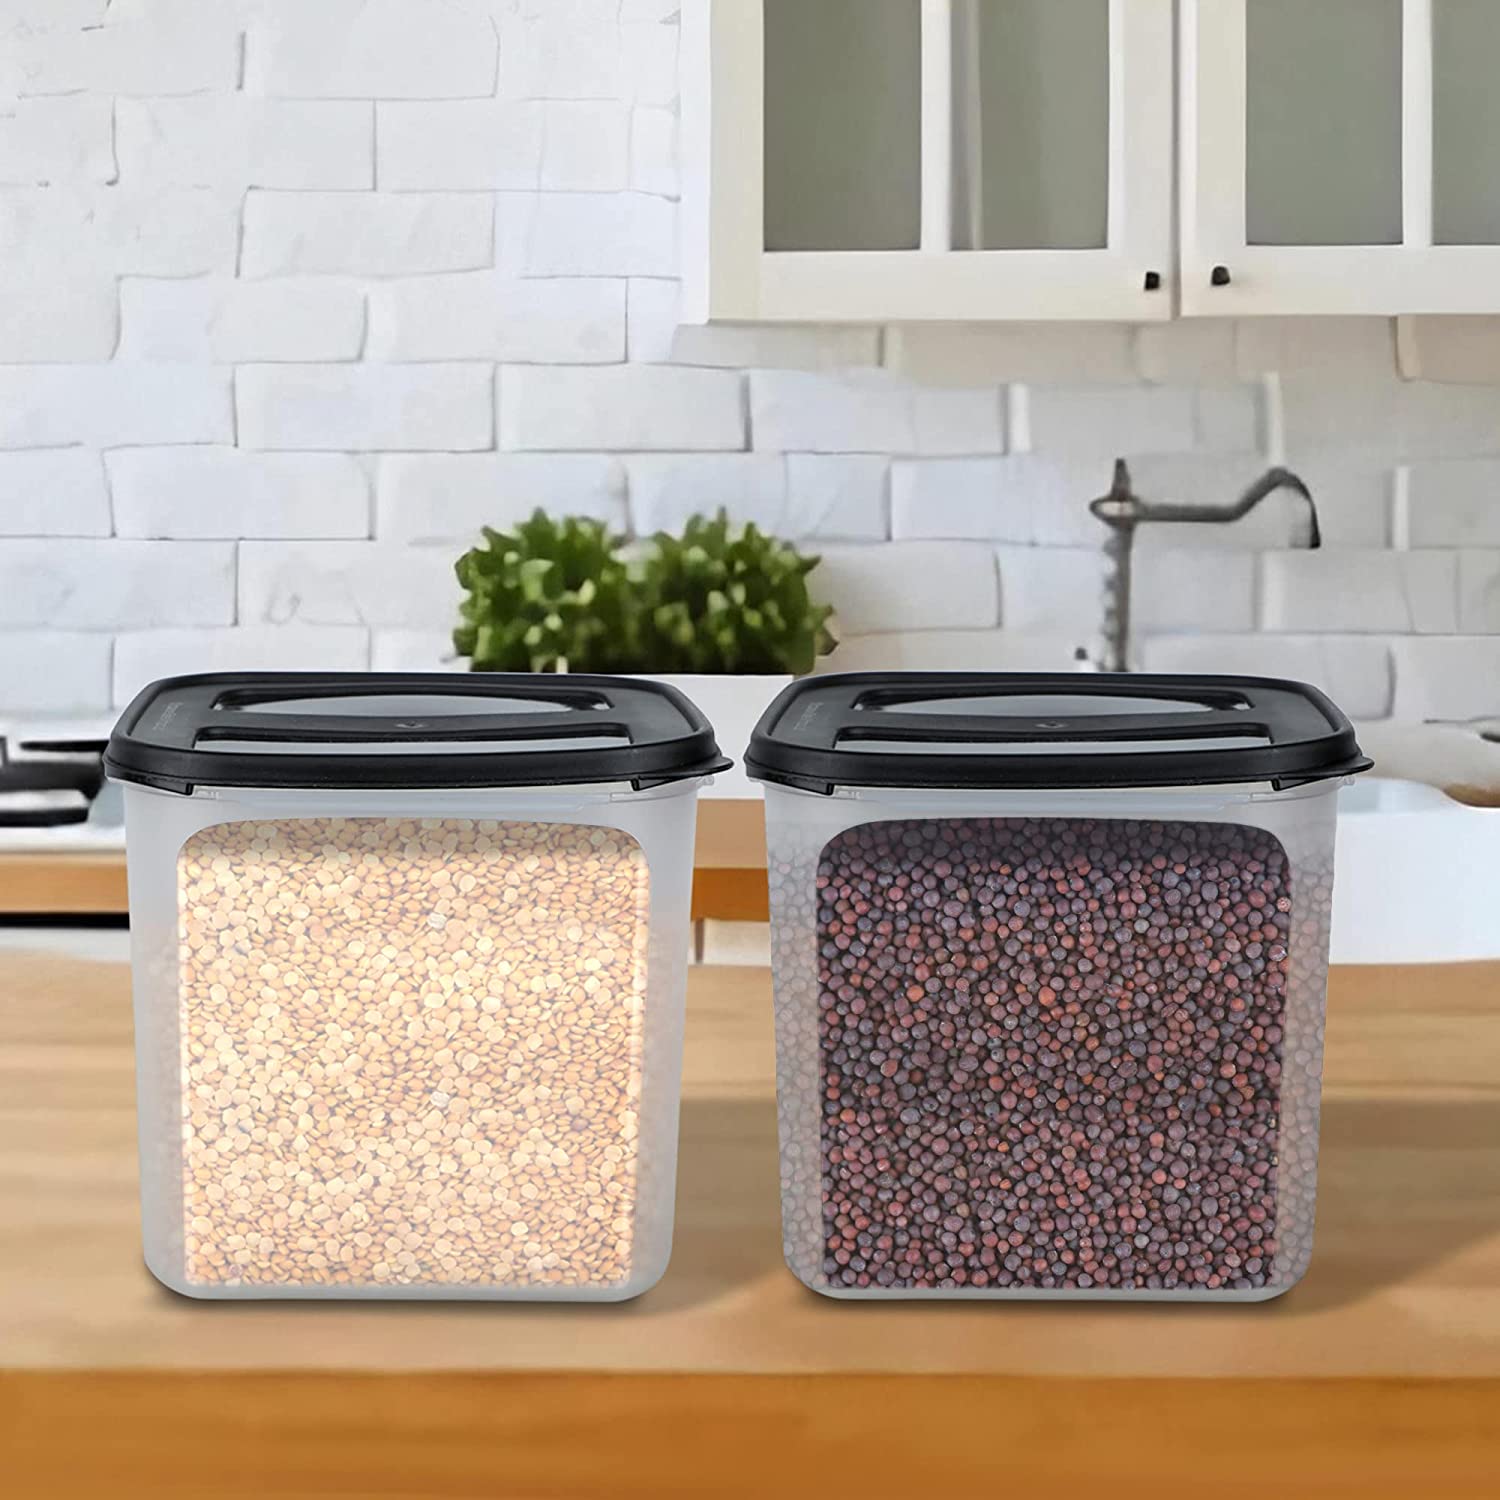 Cutting EDGE Modular Air Tight & Leak Resistant Durable Kitchen Storage Containers Set Combos with Plain Lid Multi Purpose